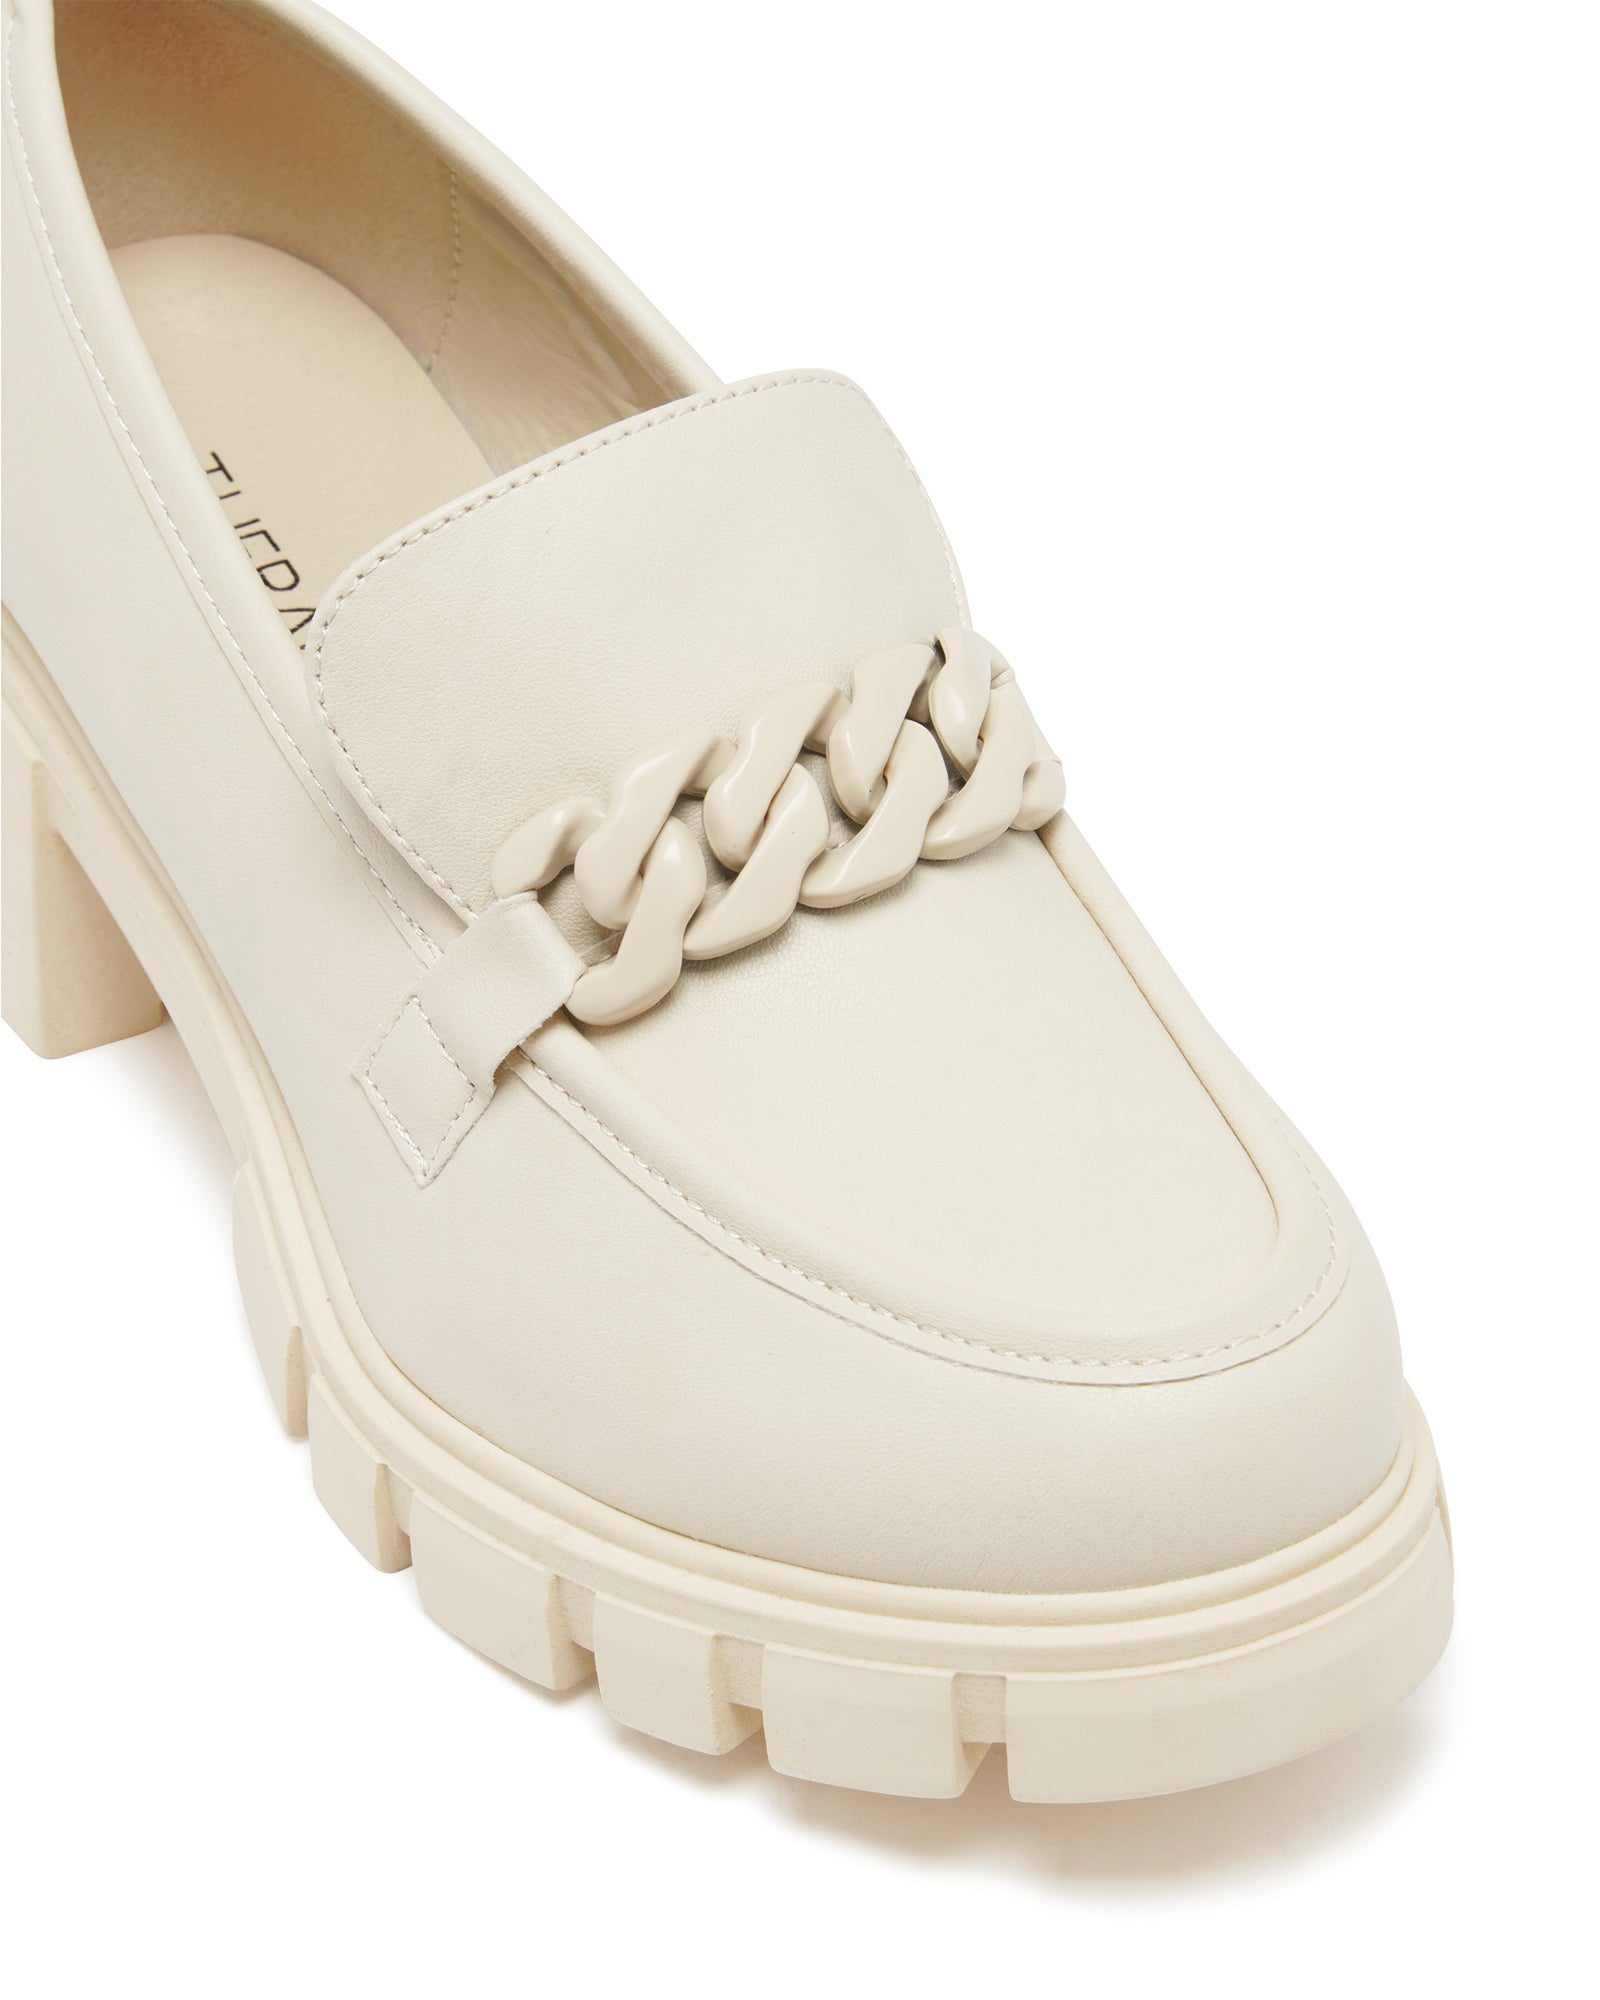 Therapy Shoes Reveal Bone | Women's Loafers | Heels | Platform | Chunky